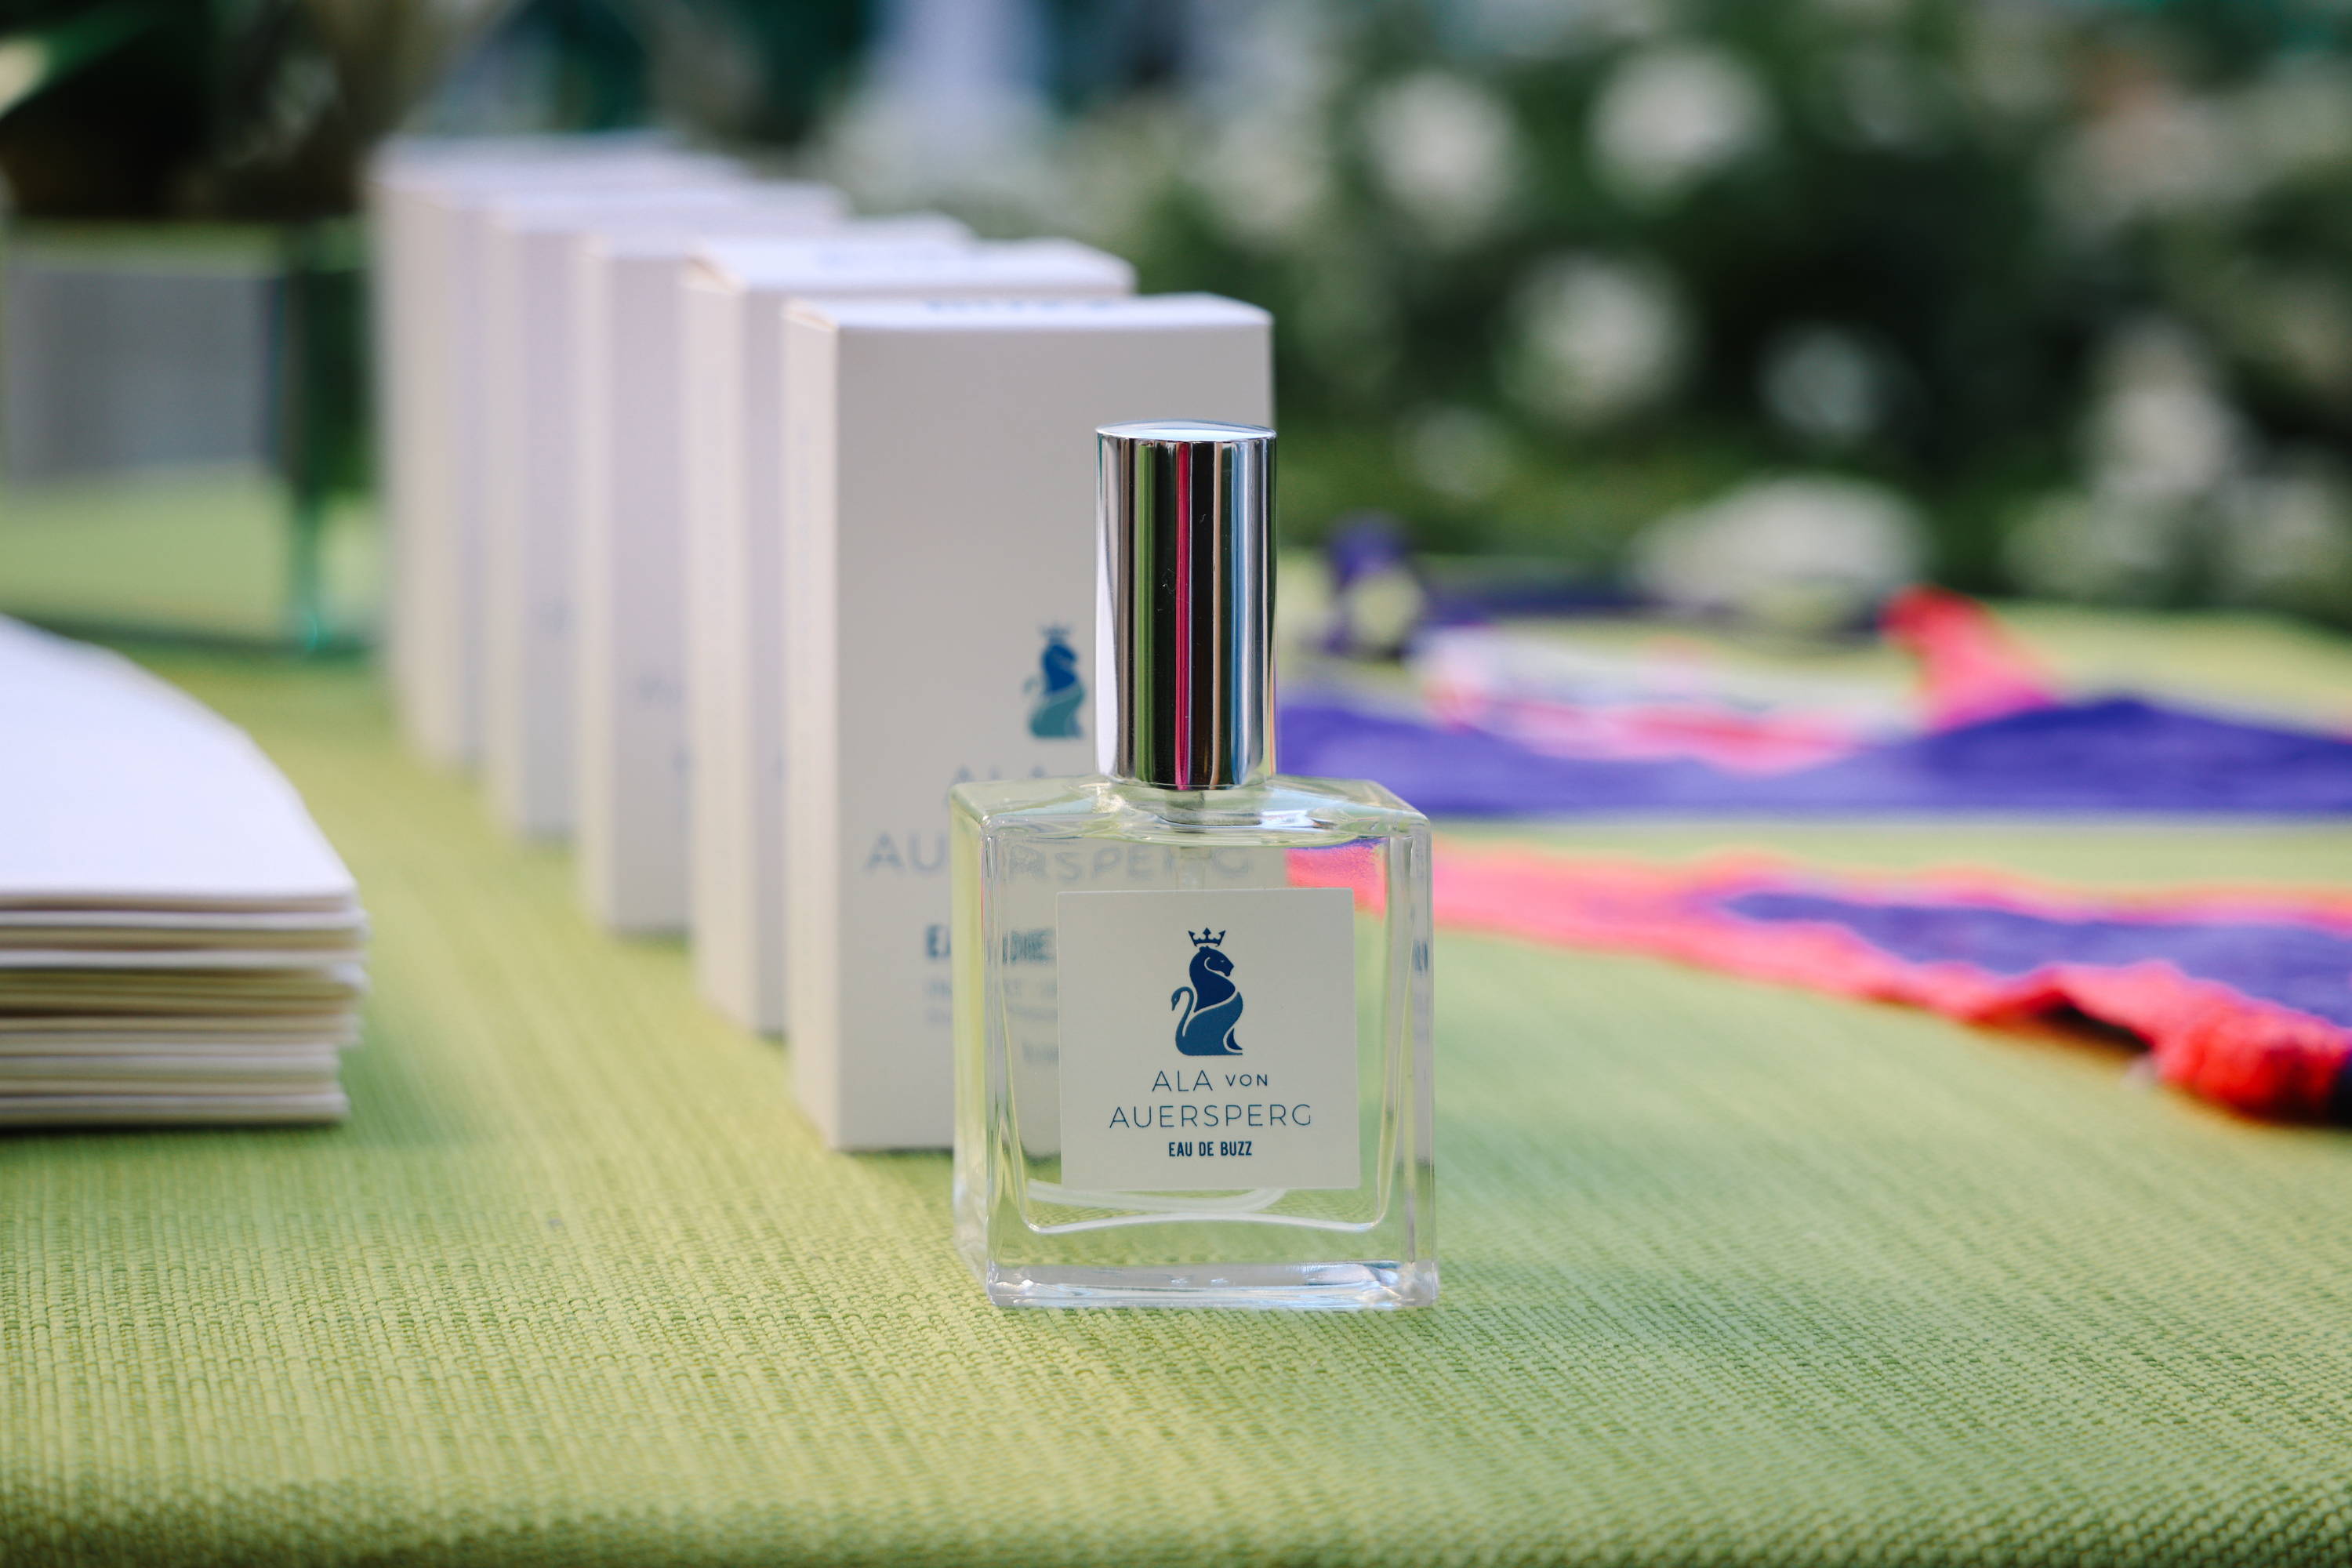 Fragrance and bug repellant collaboration with The Buzz Skin and Ala von Auersperg in Palm Beach Florida